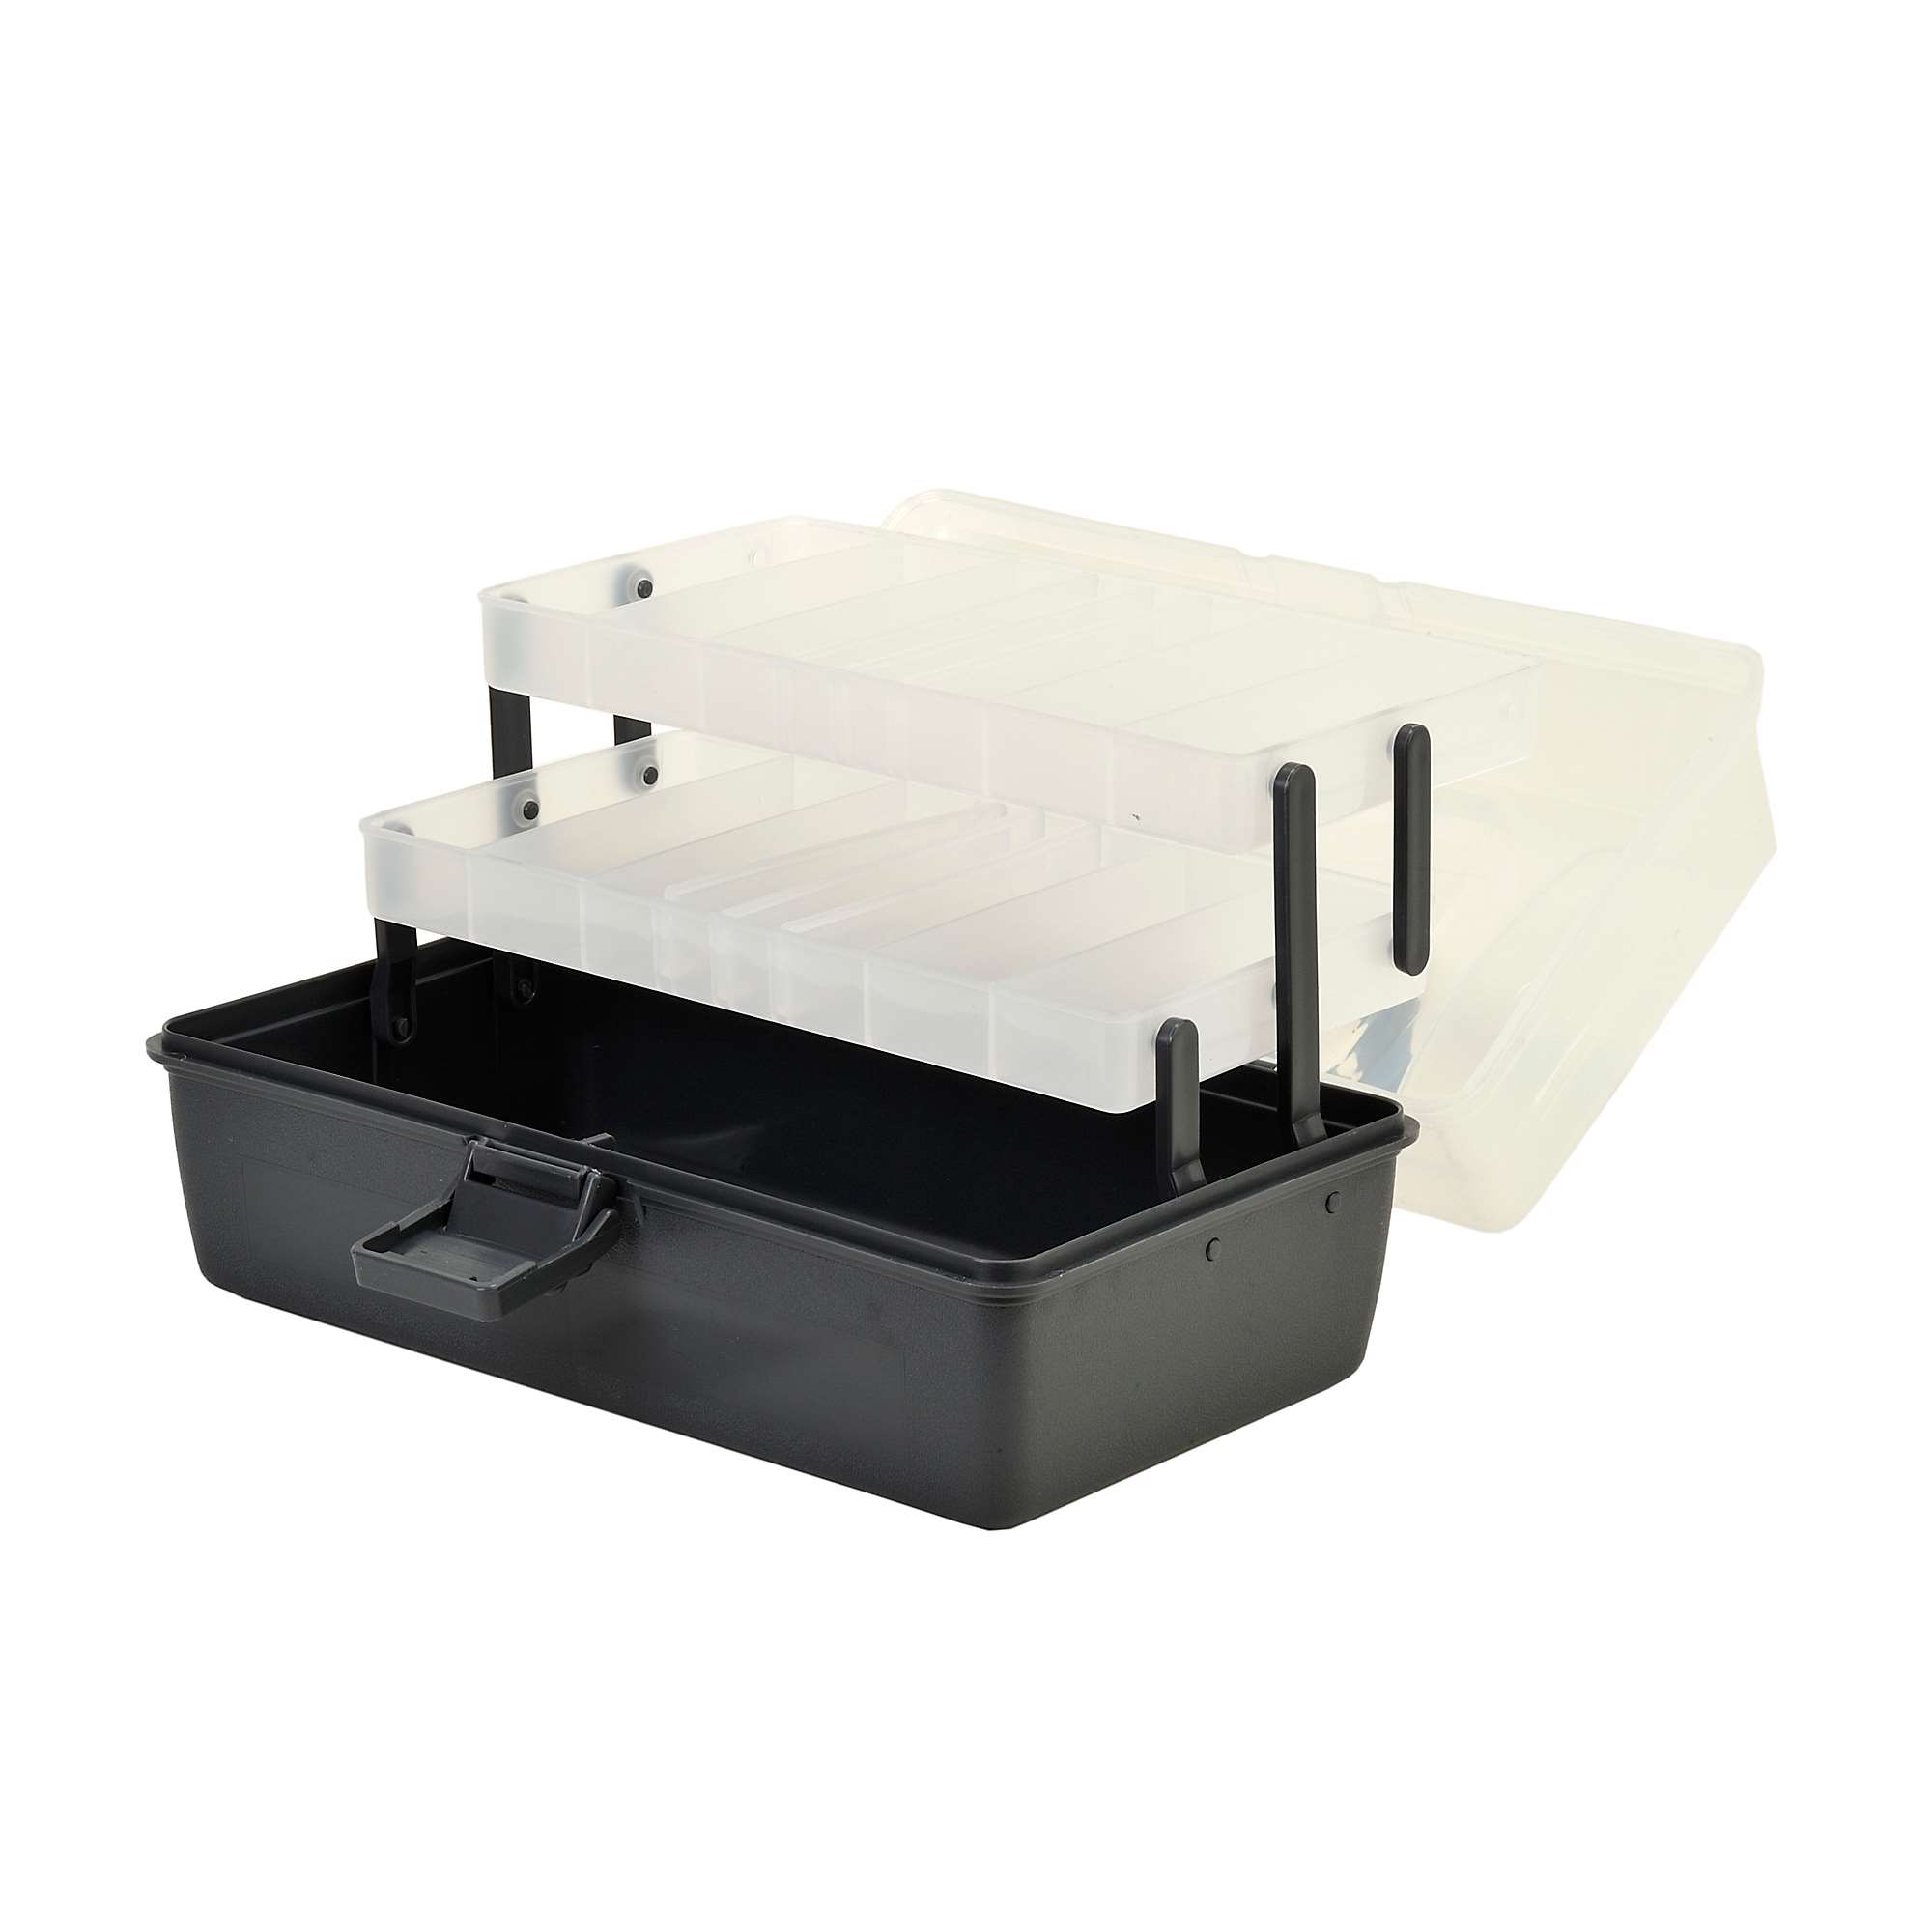 Shakespeare 2 Tier Cantilever Tackle Box - Clear Black